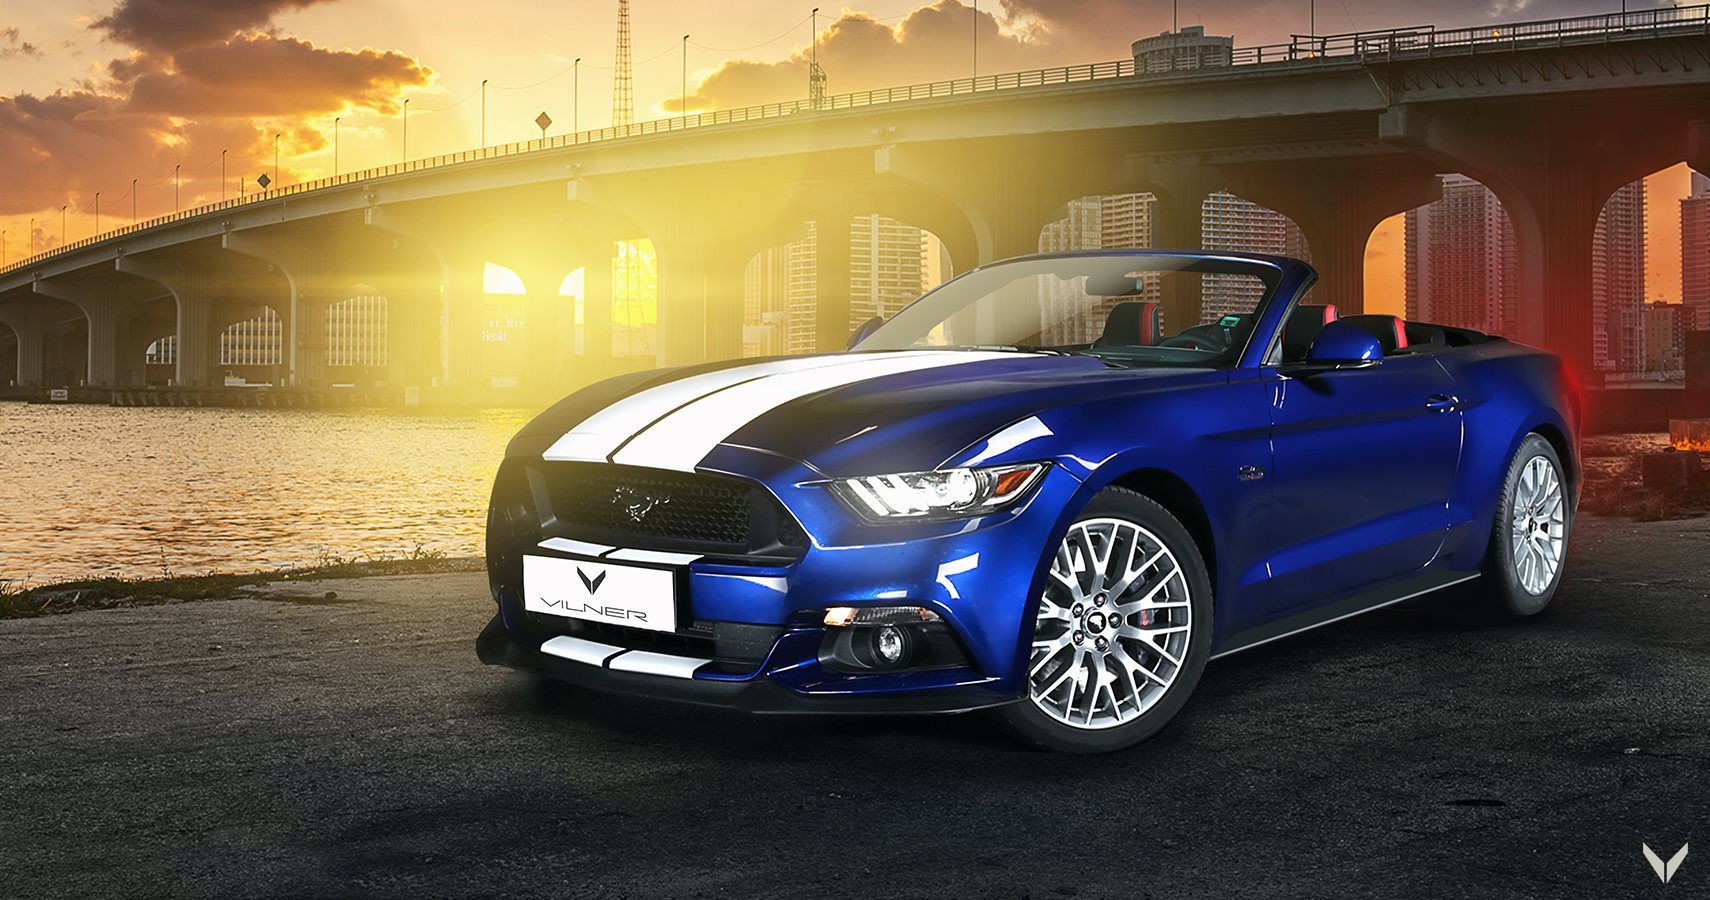 Vilner Revamps Old Ford Mustang Convertibles With New Cabins